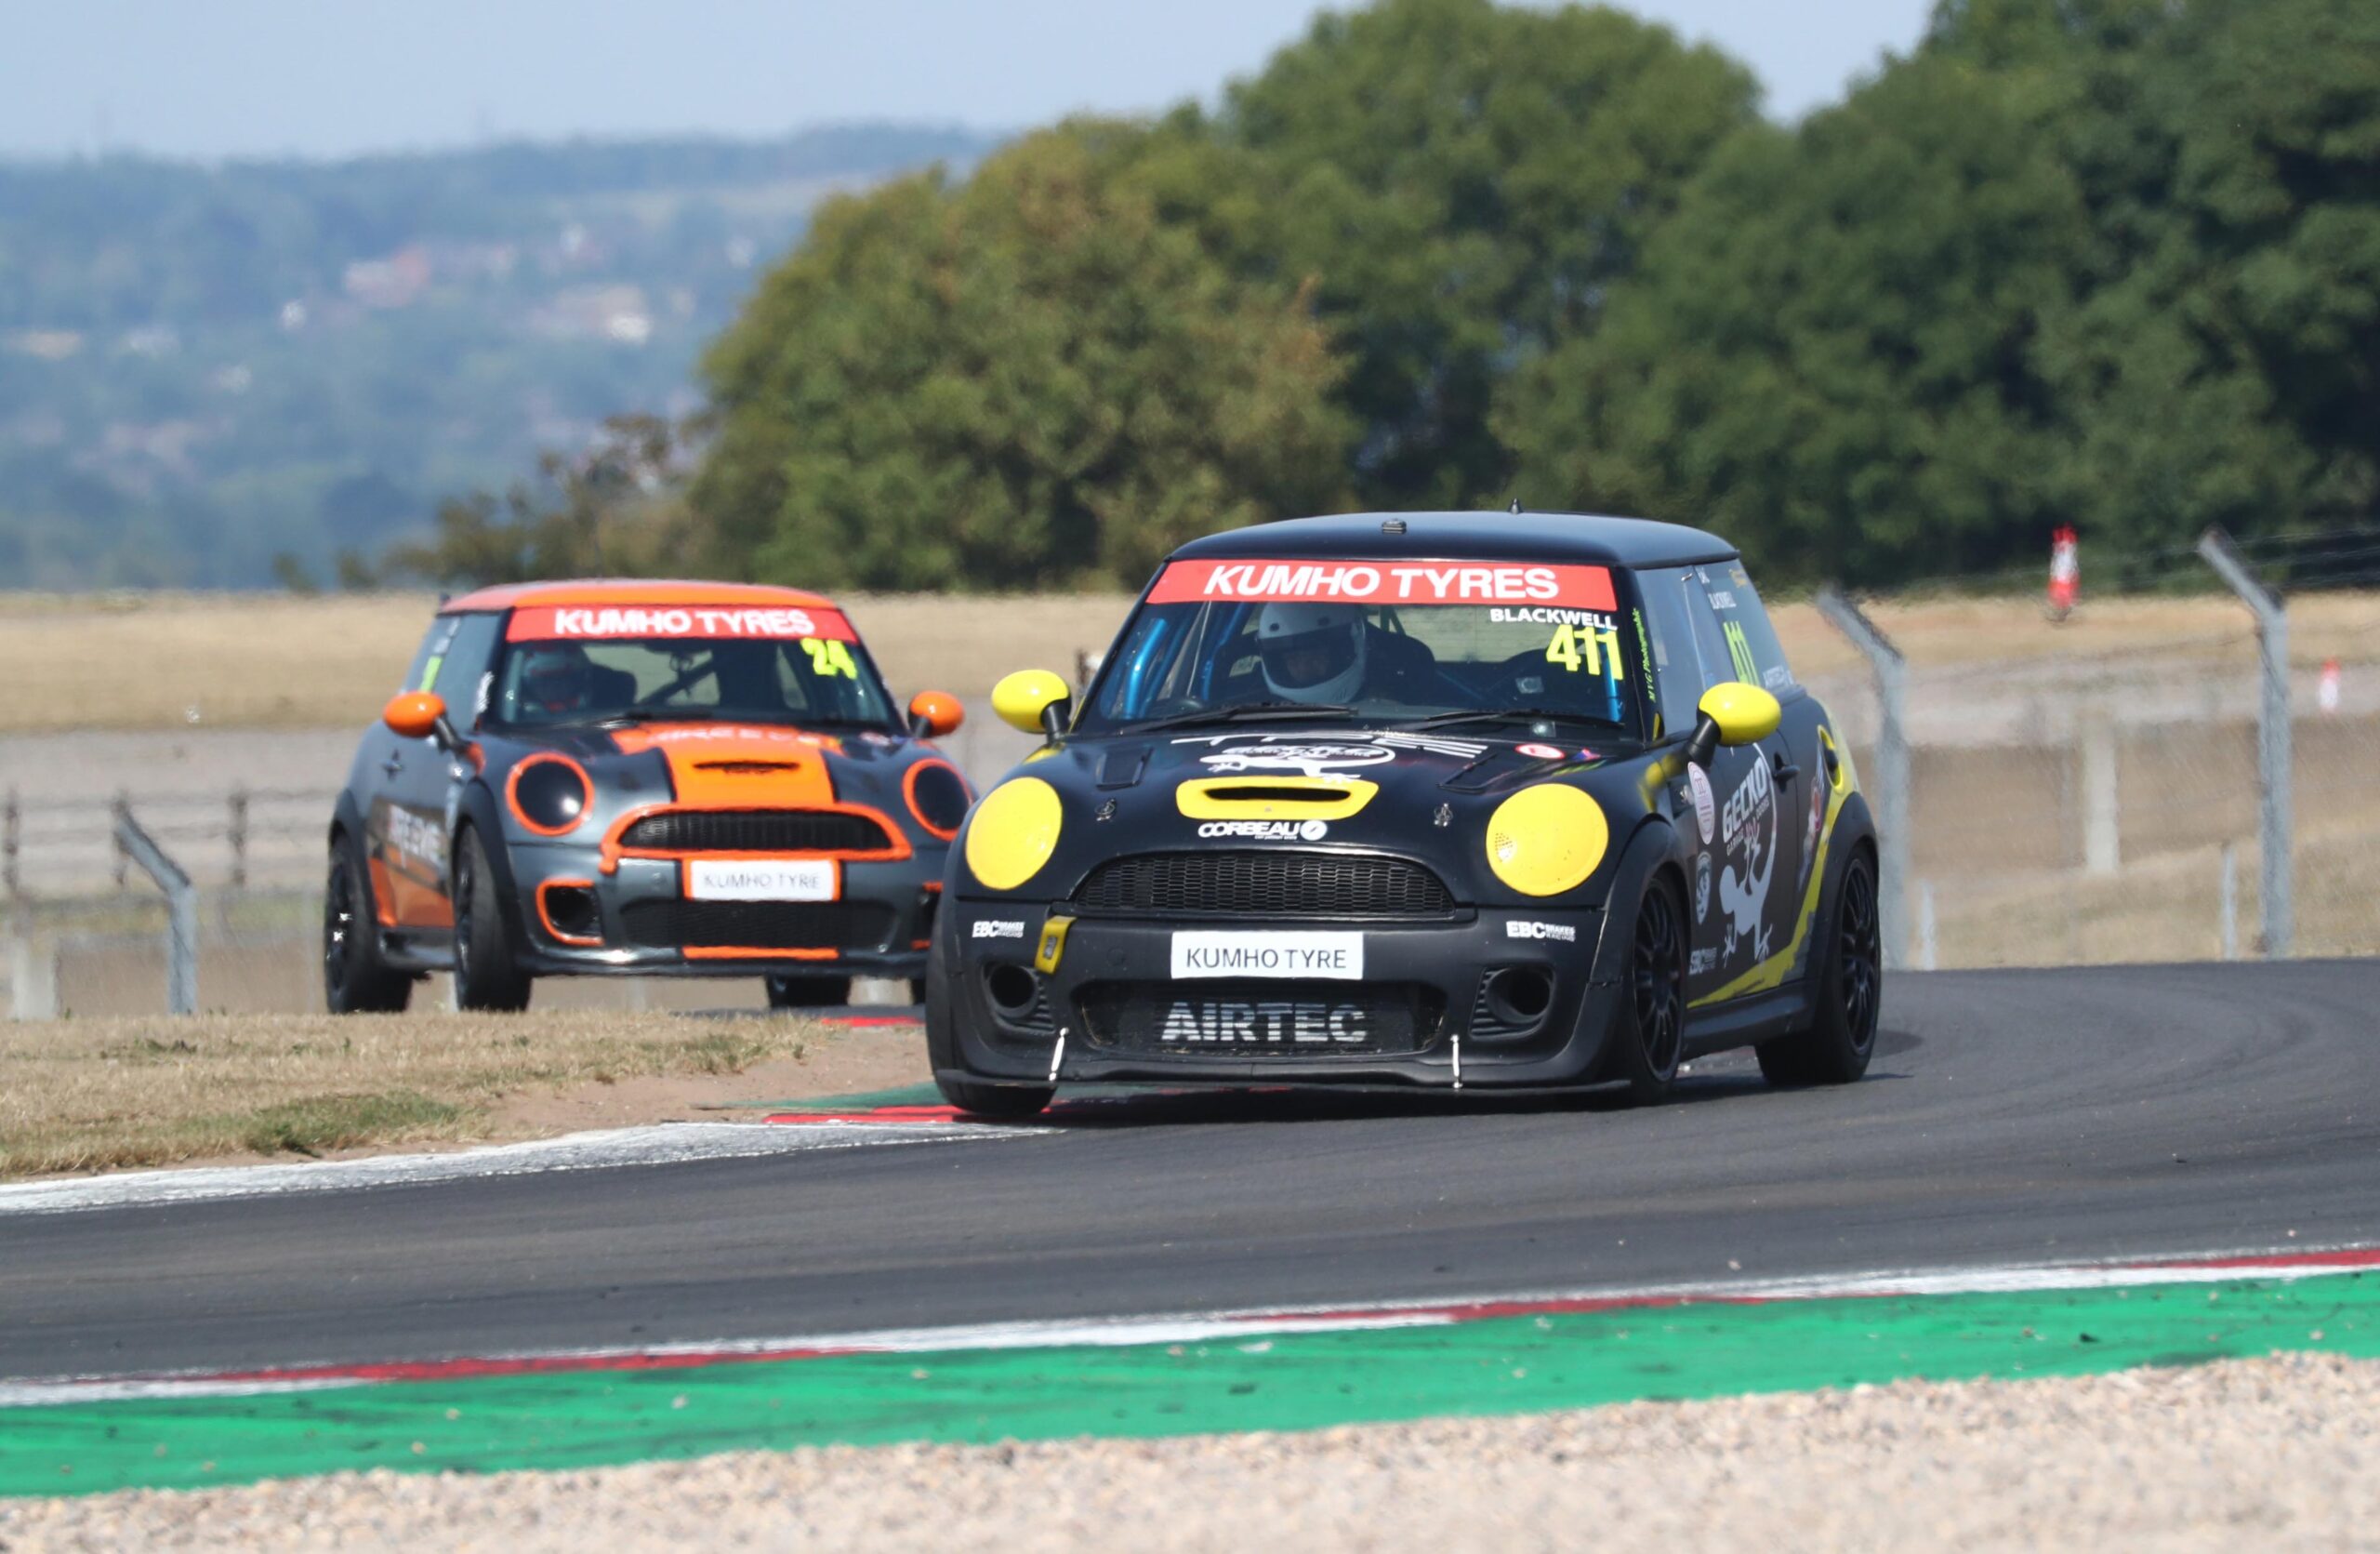 EBC-Equipped Mini Cooper S Racer Goes from Last to First in Donington Round